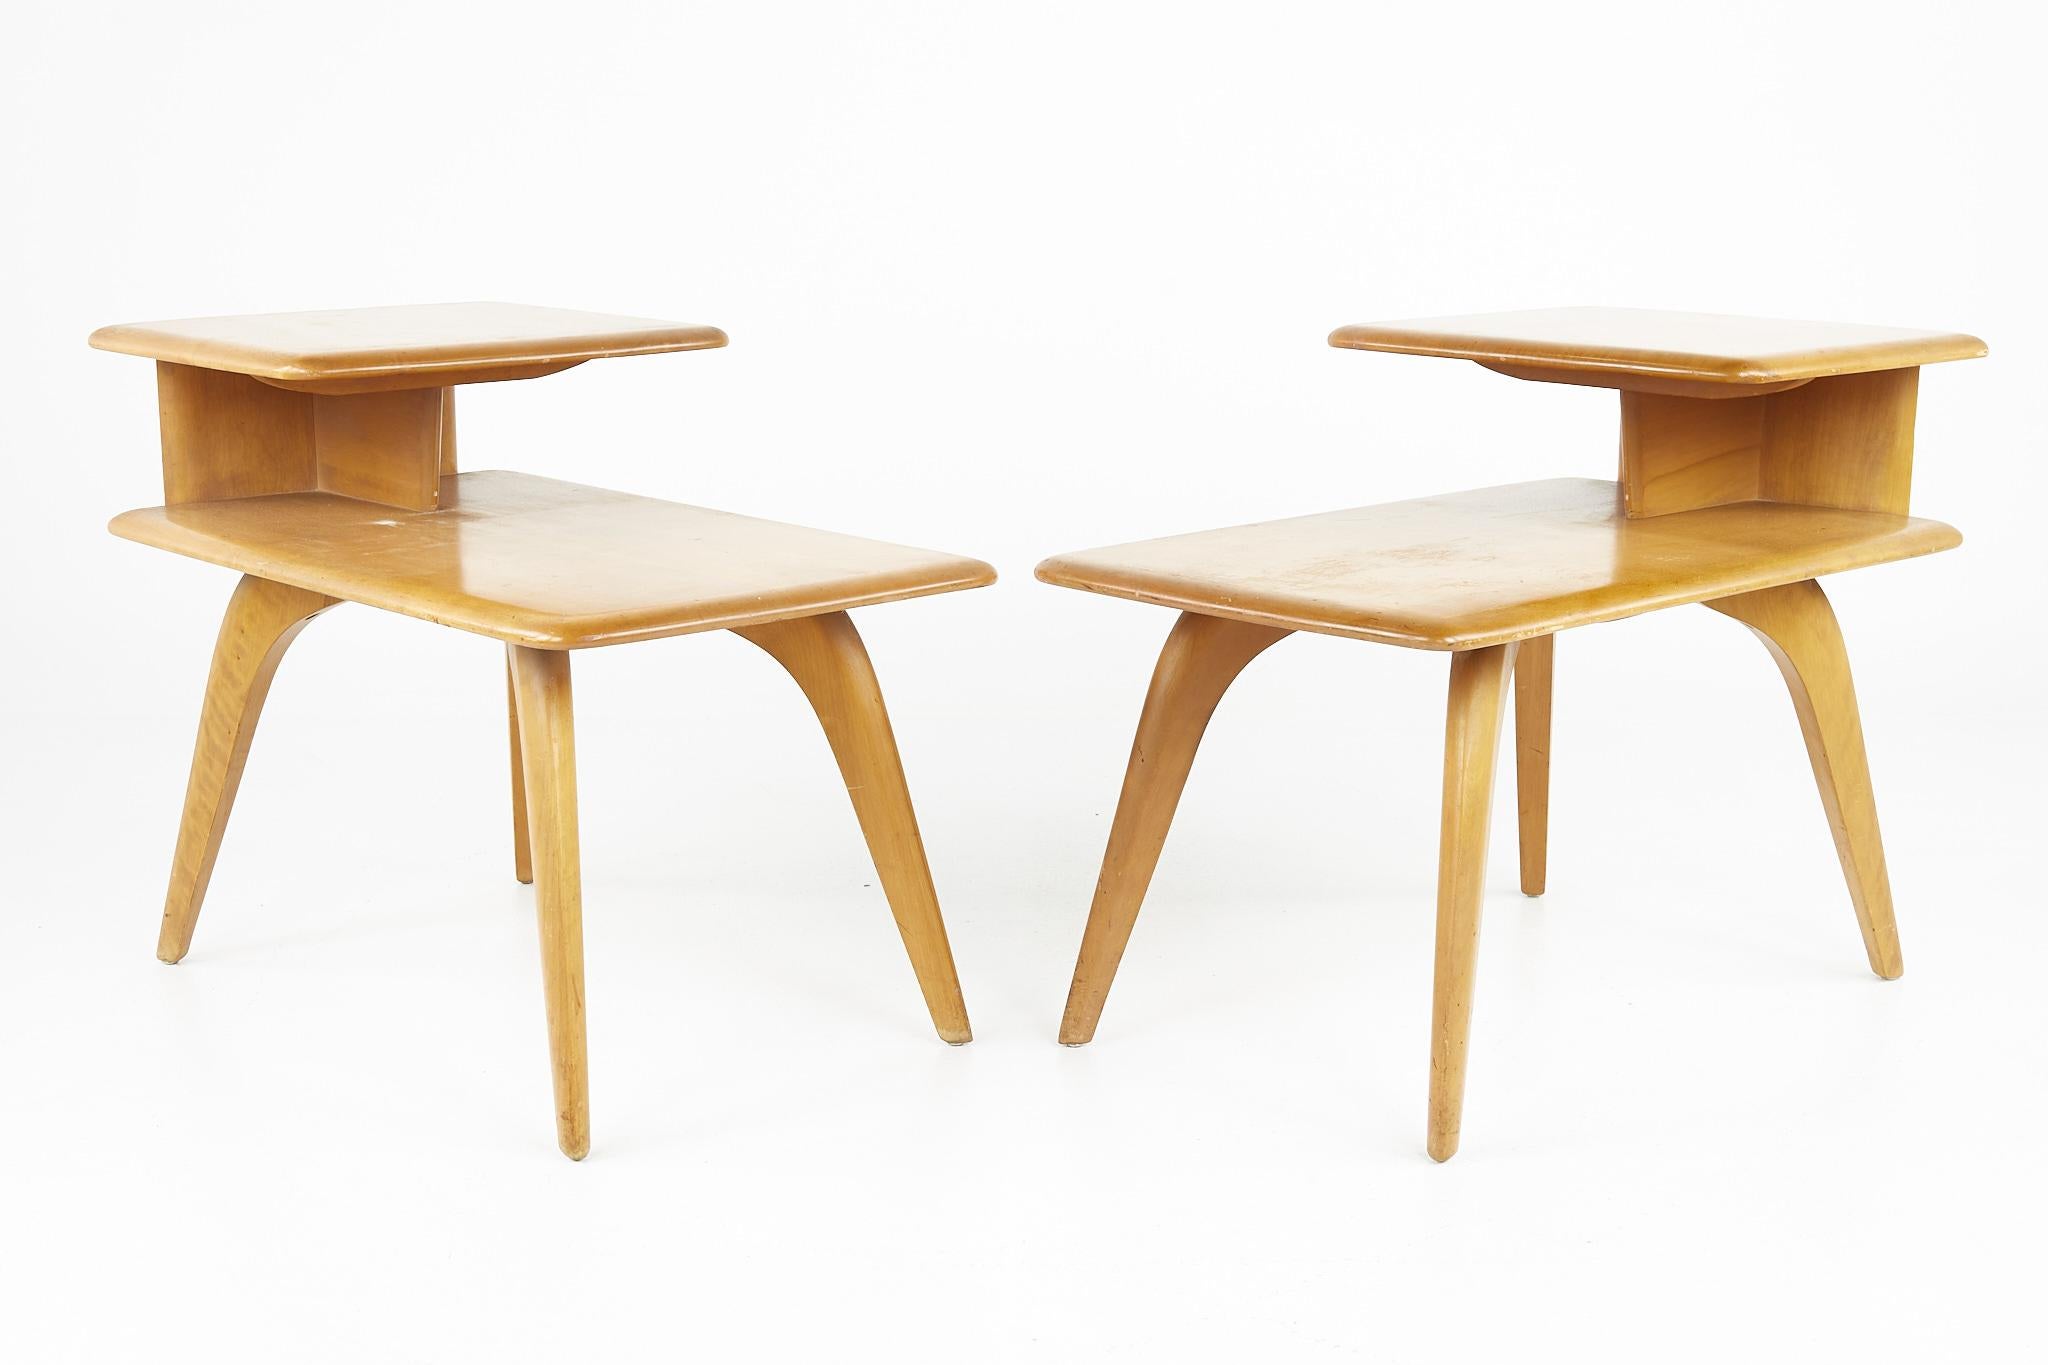 Heywood Wakefield mid century step side end tables - a pair

Each table measures: 29.5 wide x 17 deep x 22 inches high

?All pieces of furniture can be had in what we call restored vintage condition. That means the piece is restored upon